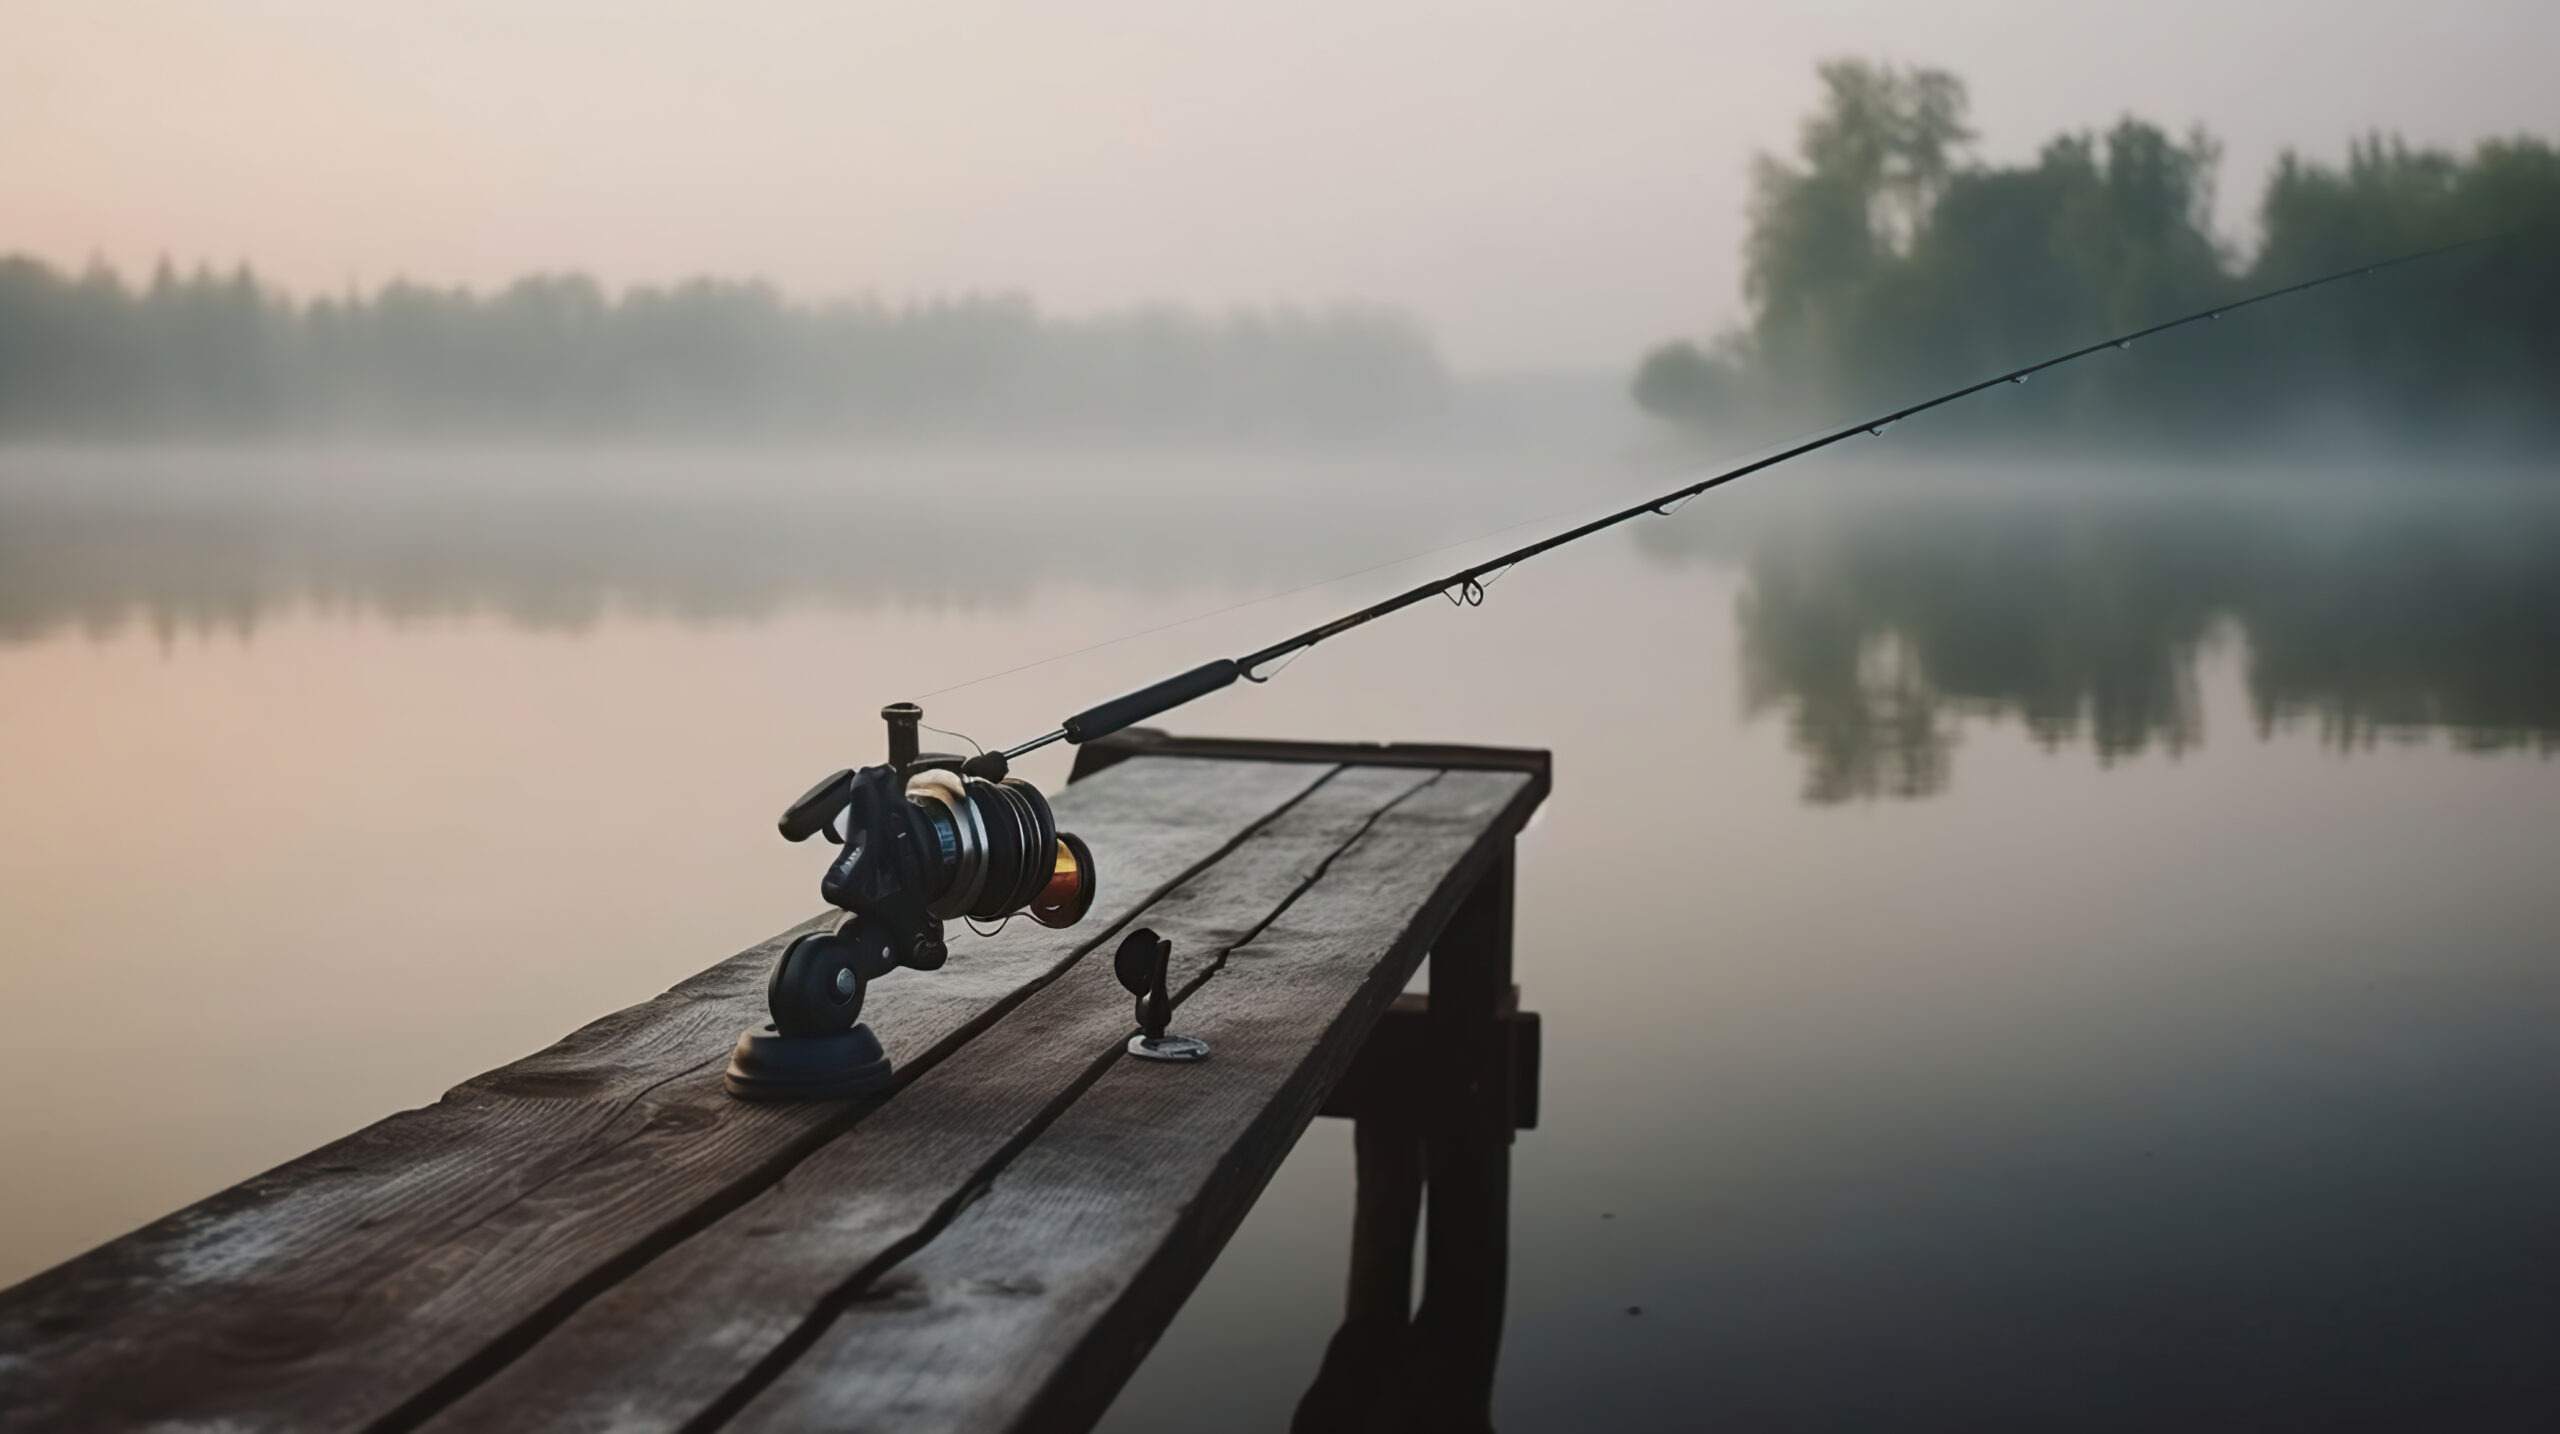 fanatic4fishing.com : How do you tell if a rod and reel are balanced?